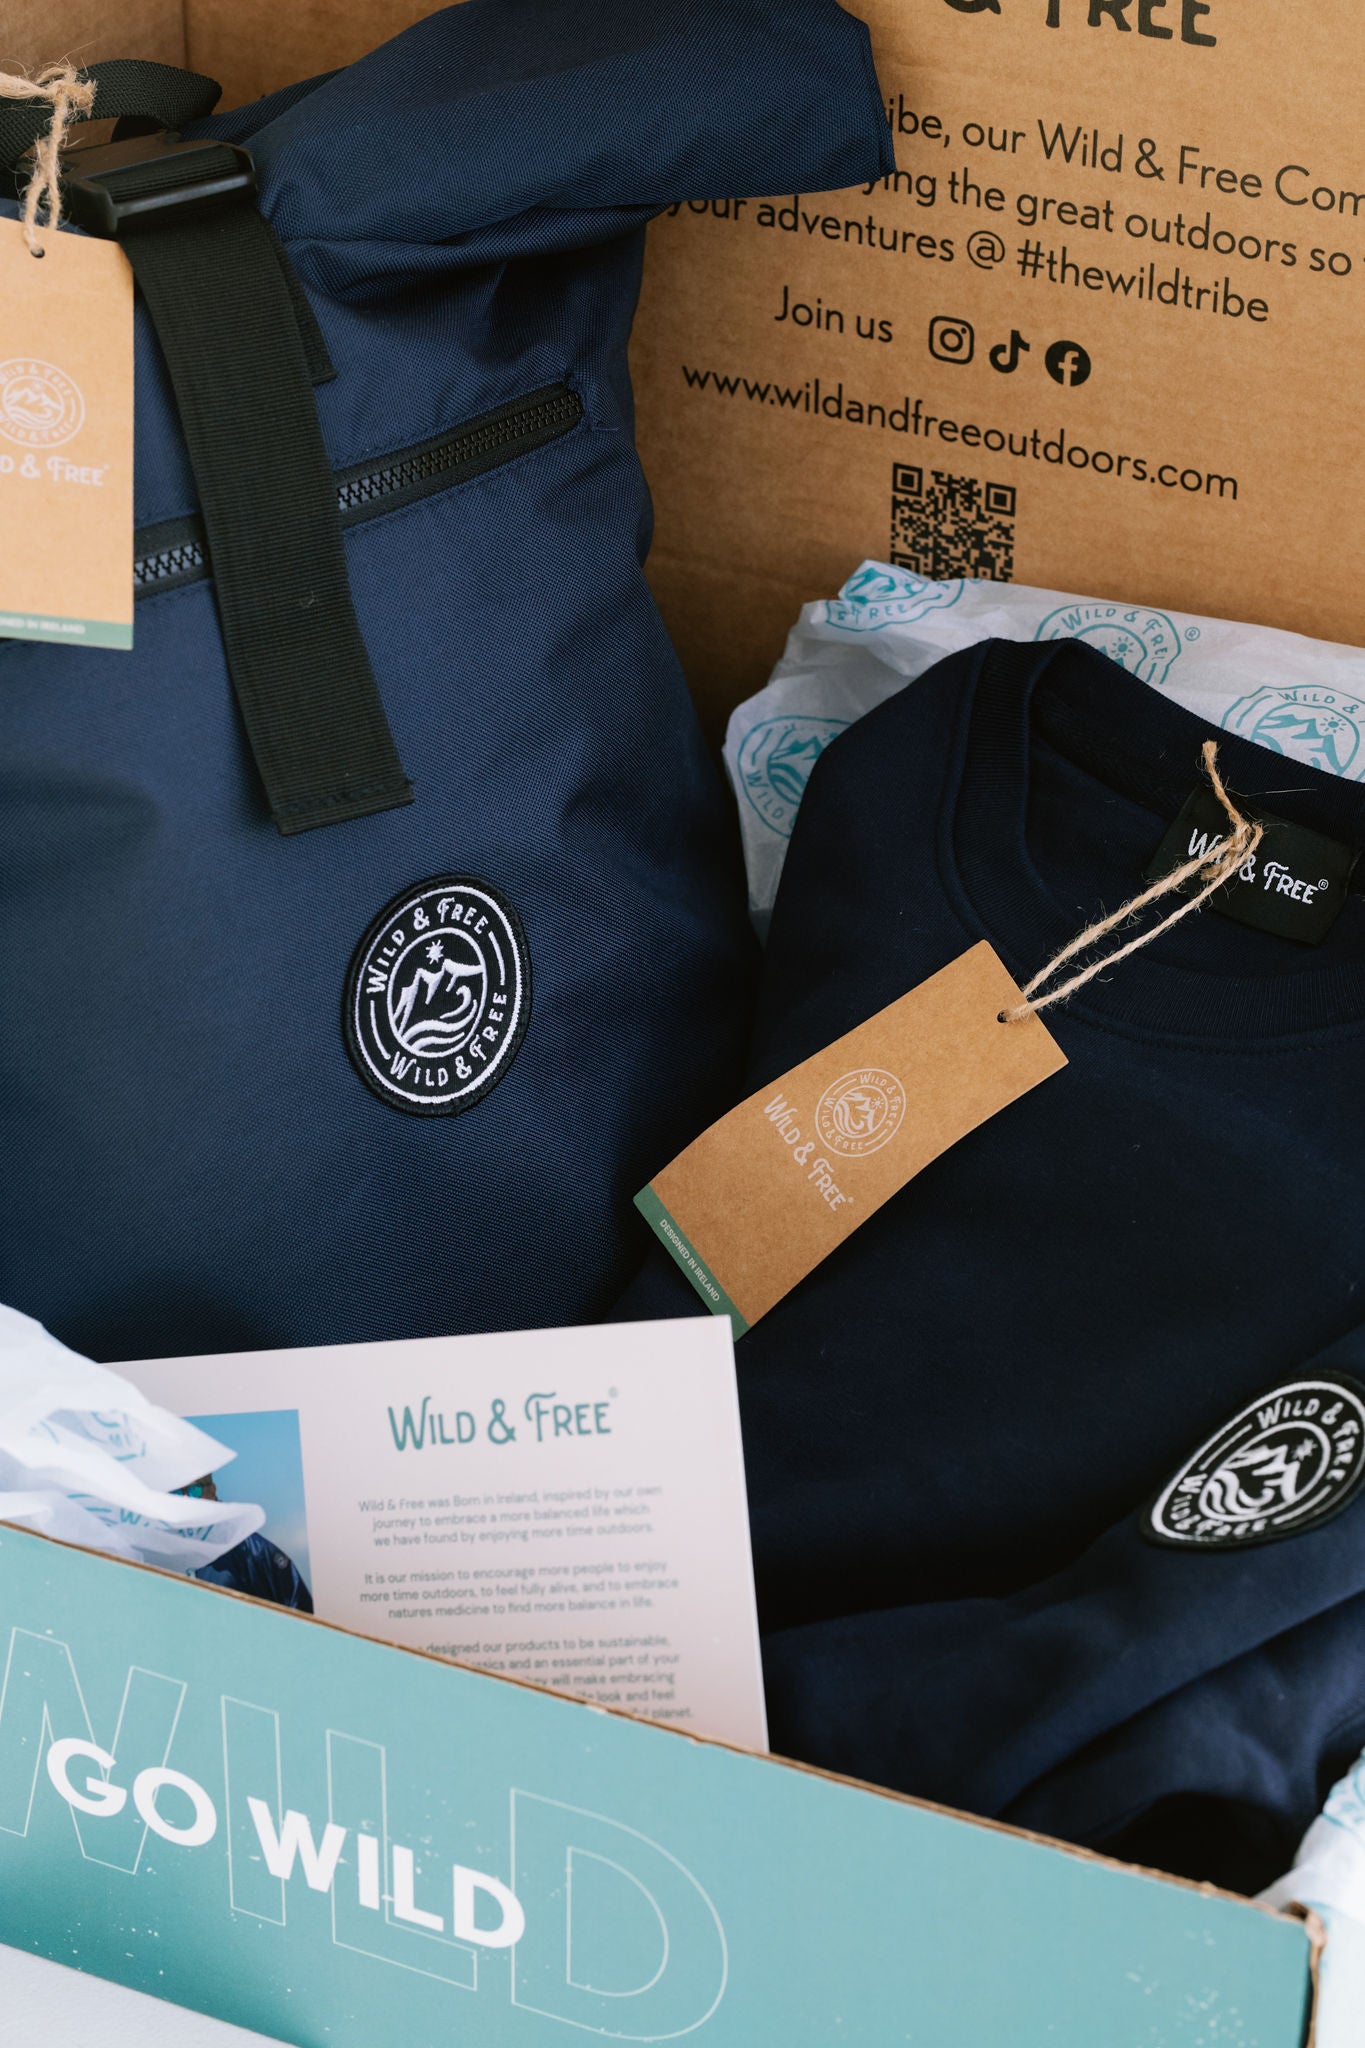 The Everyday On The Go Bundle -  Wild & Free Sweatshirt and 20L Backpack, packed in a Wild & Free Gift Box